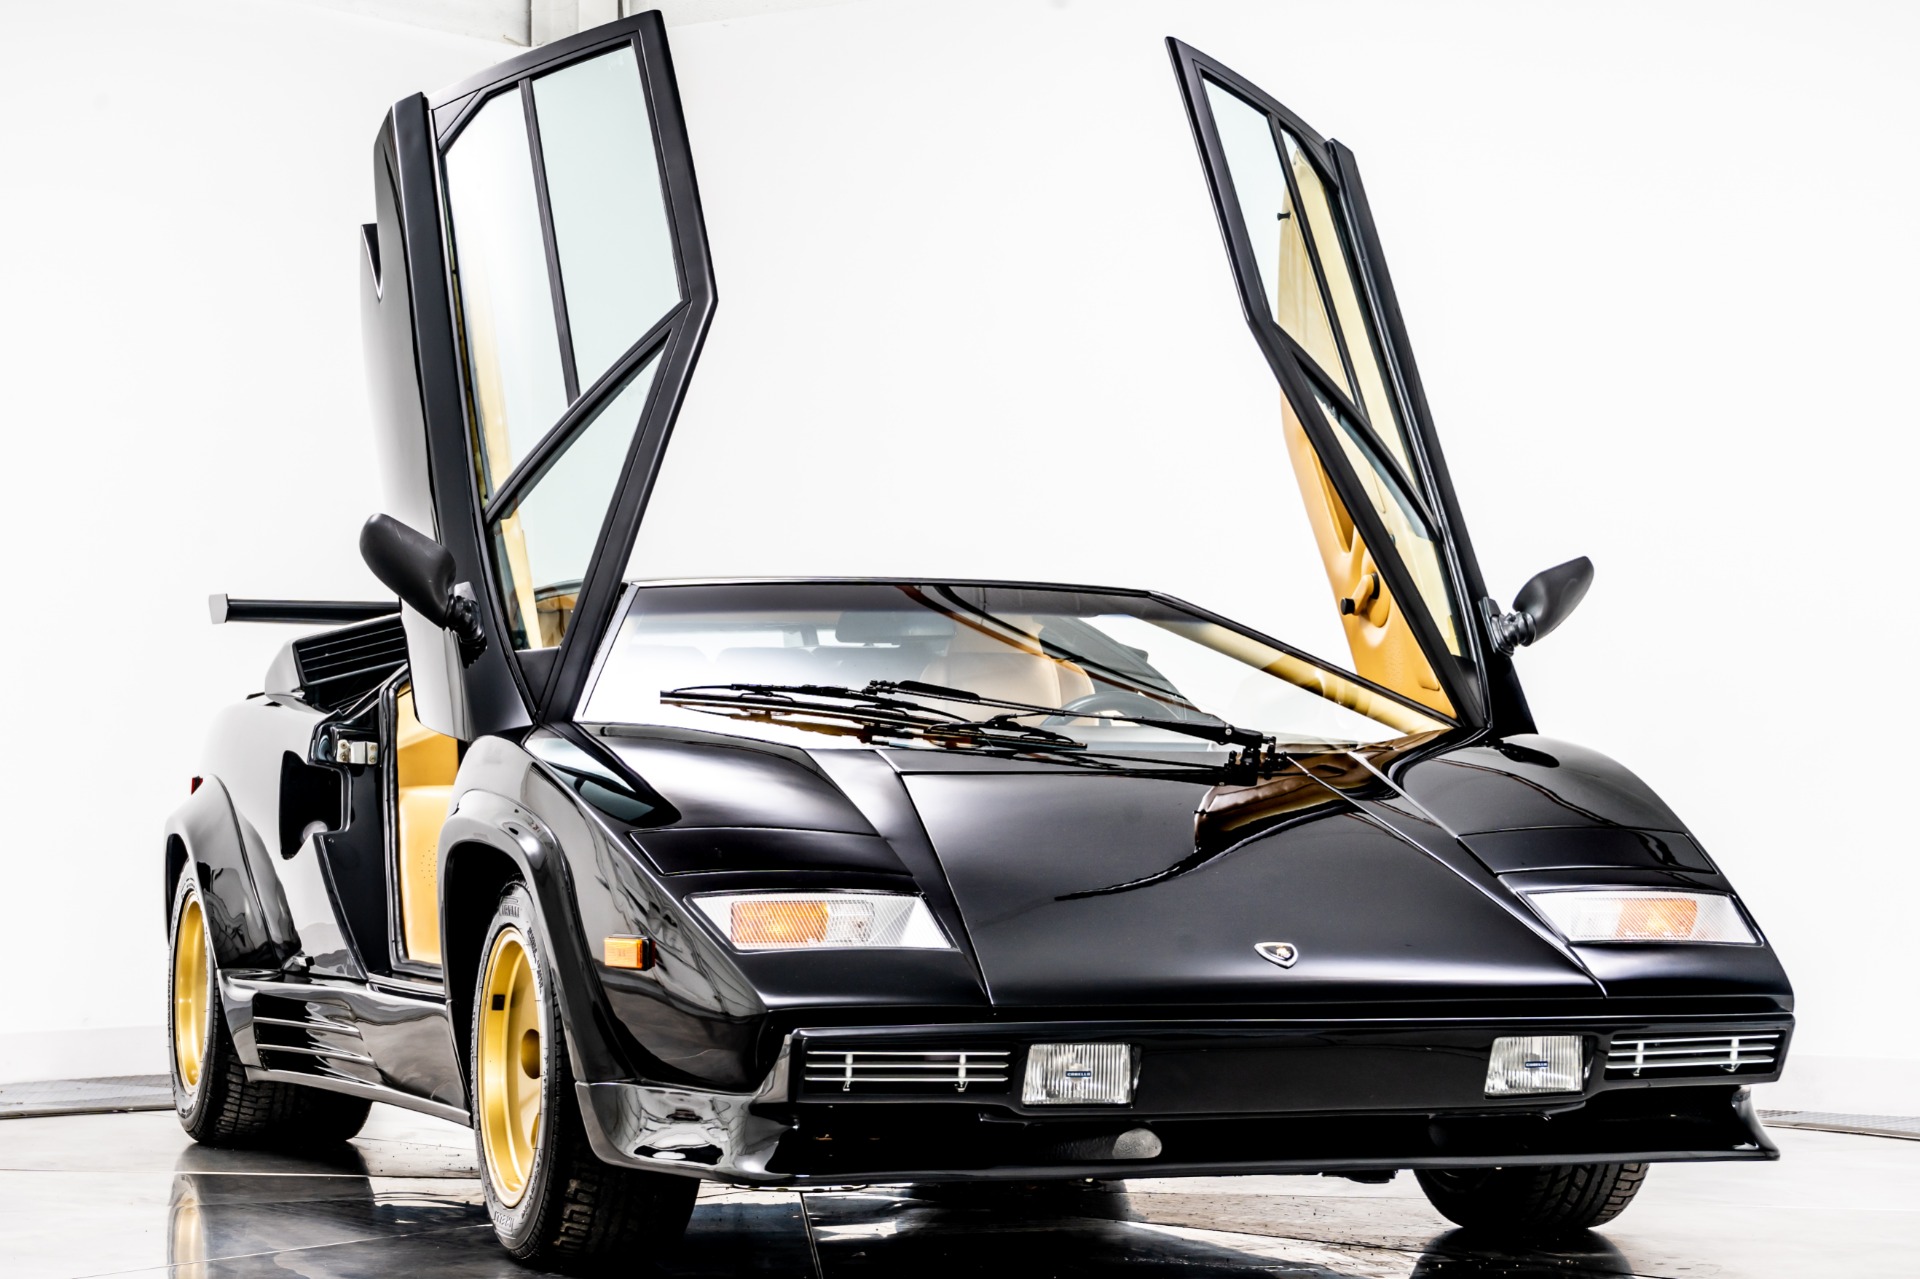 Used 1988 Lamborghini Countach For Sale (Sold) | Marshall Goldman Beverly  Hills Stock #W21943